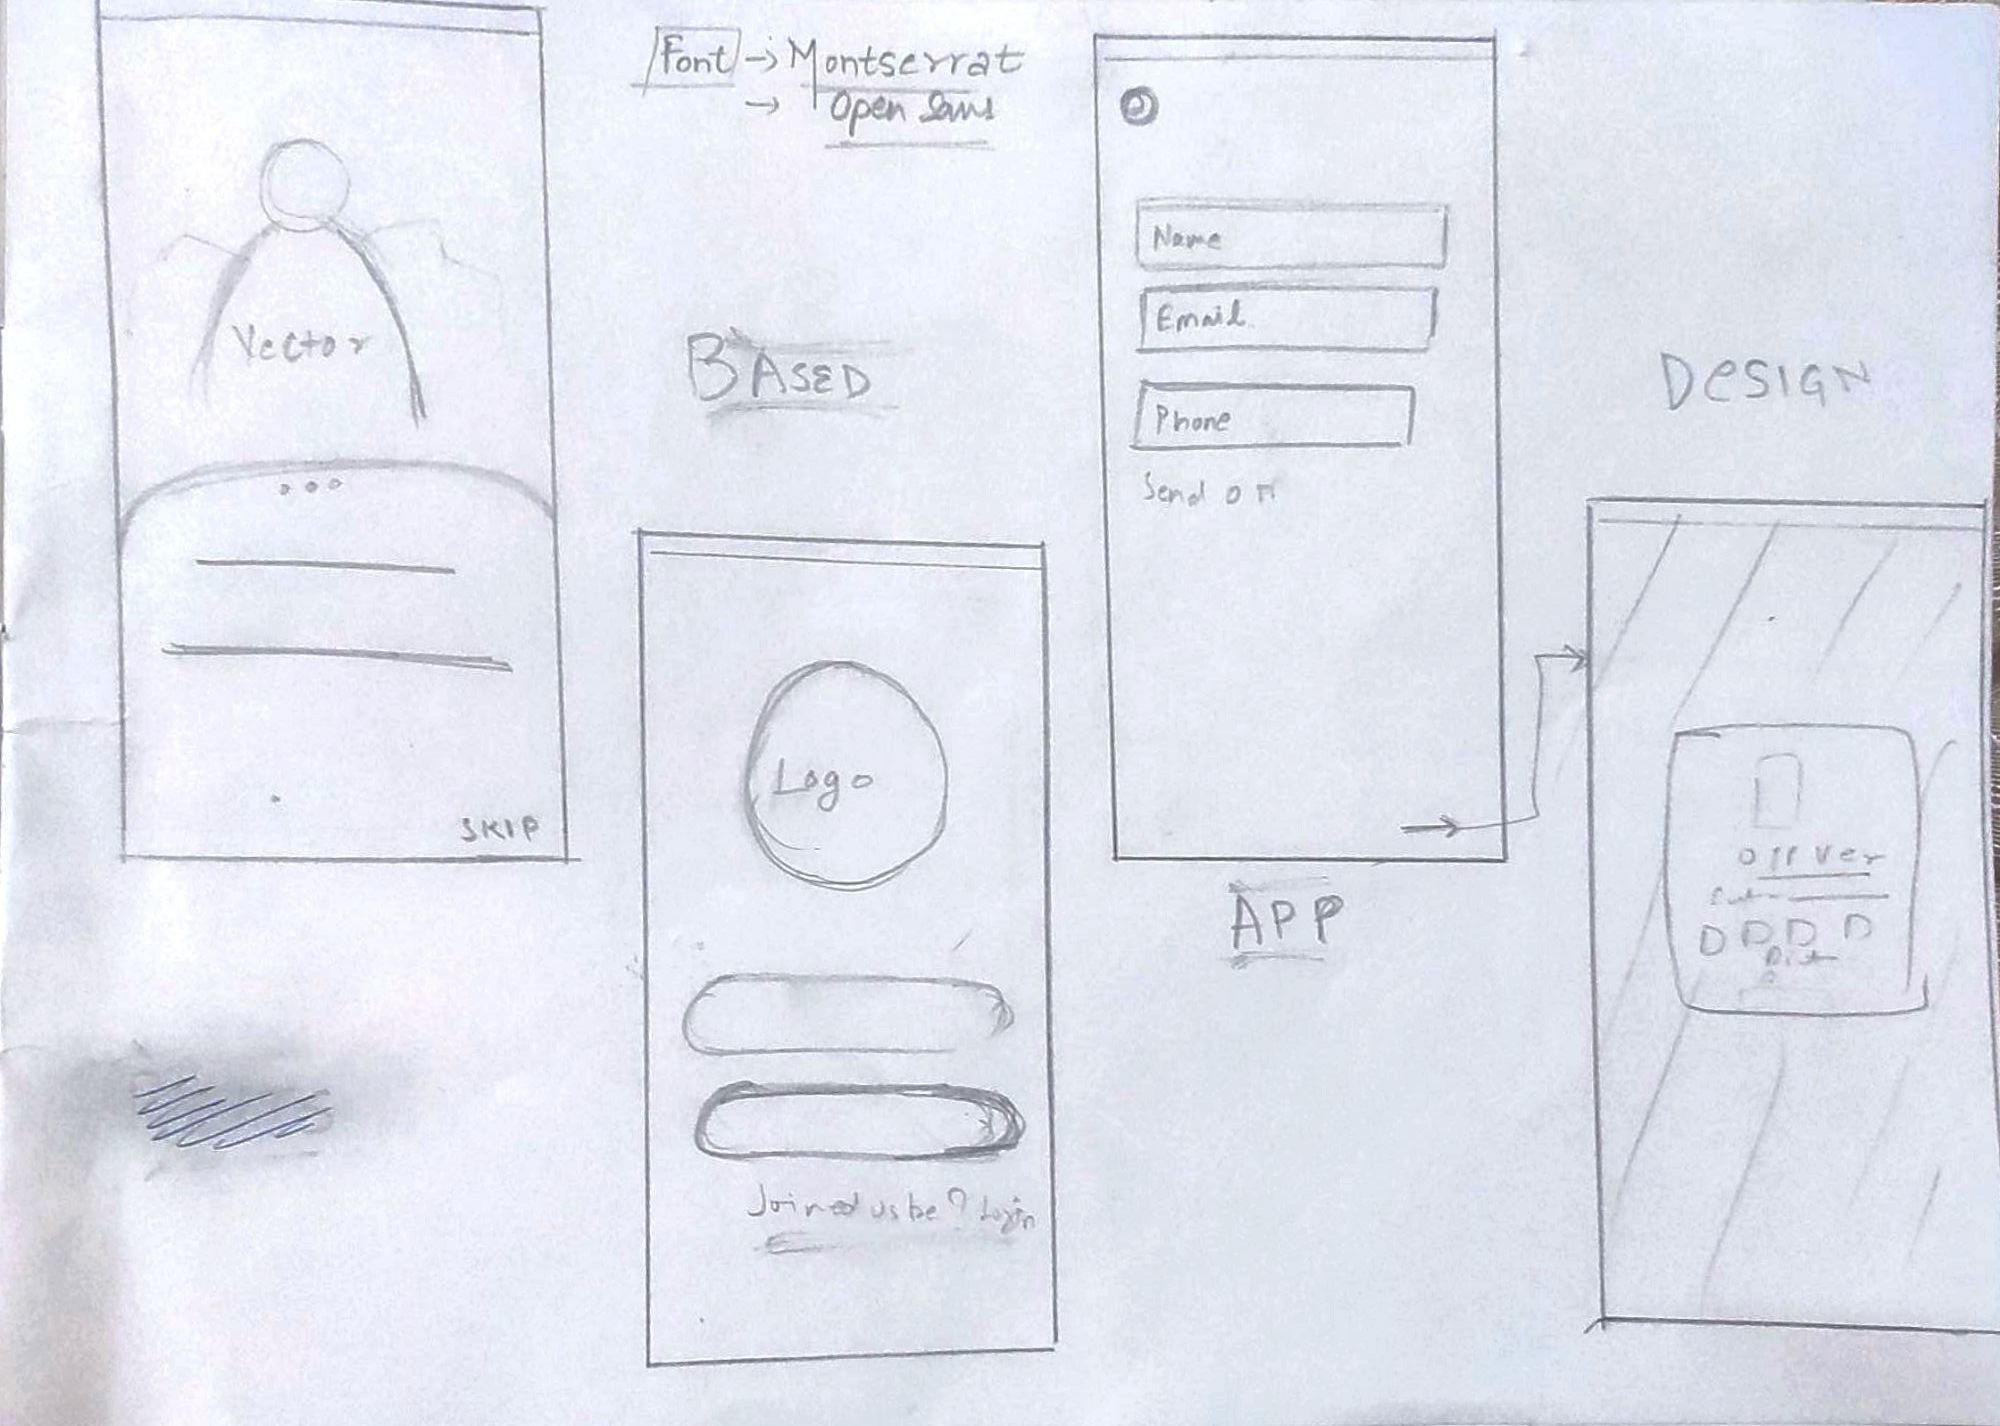 A glimpse to the wireframing on paper